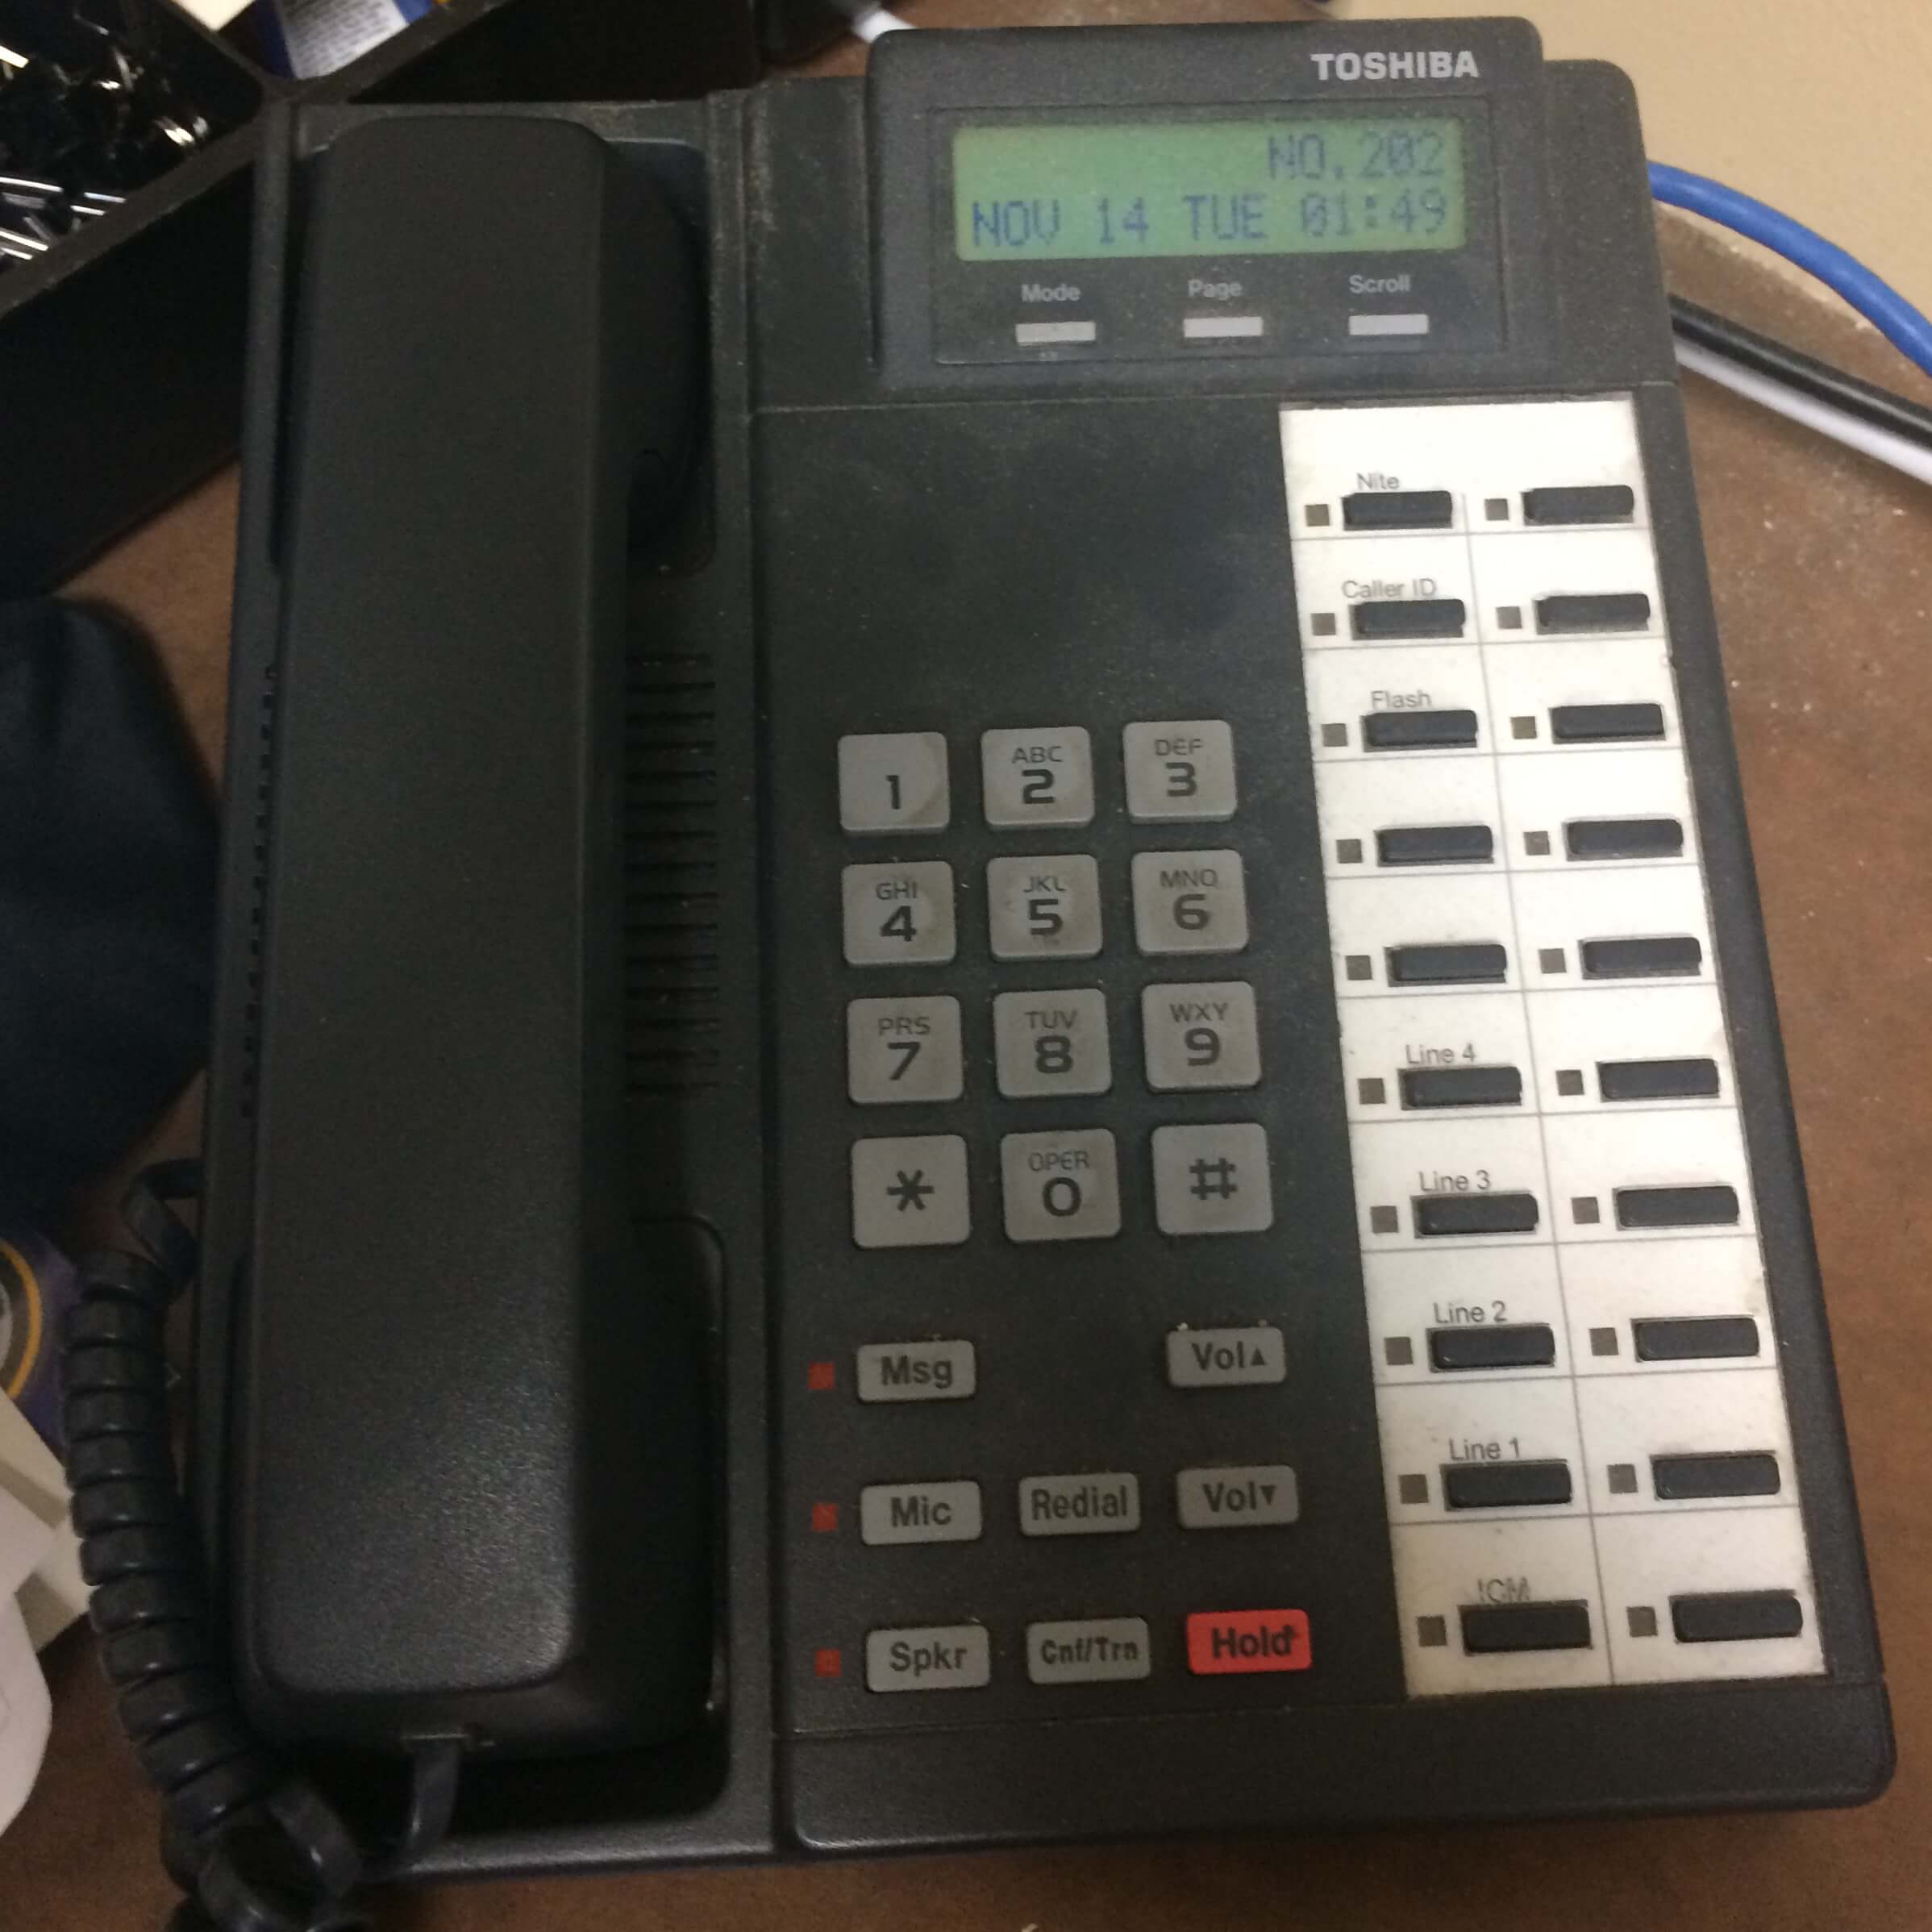 What Is Best Phone System For Small Business?